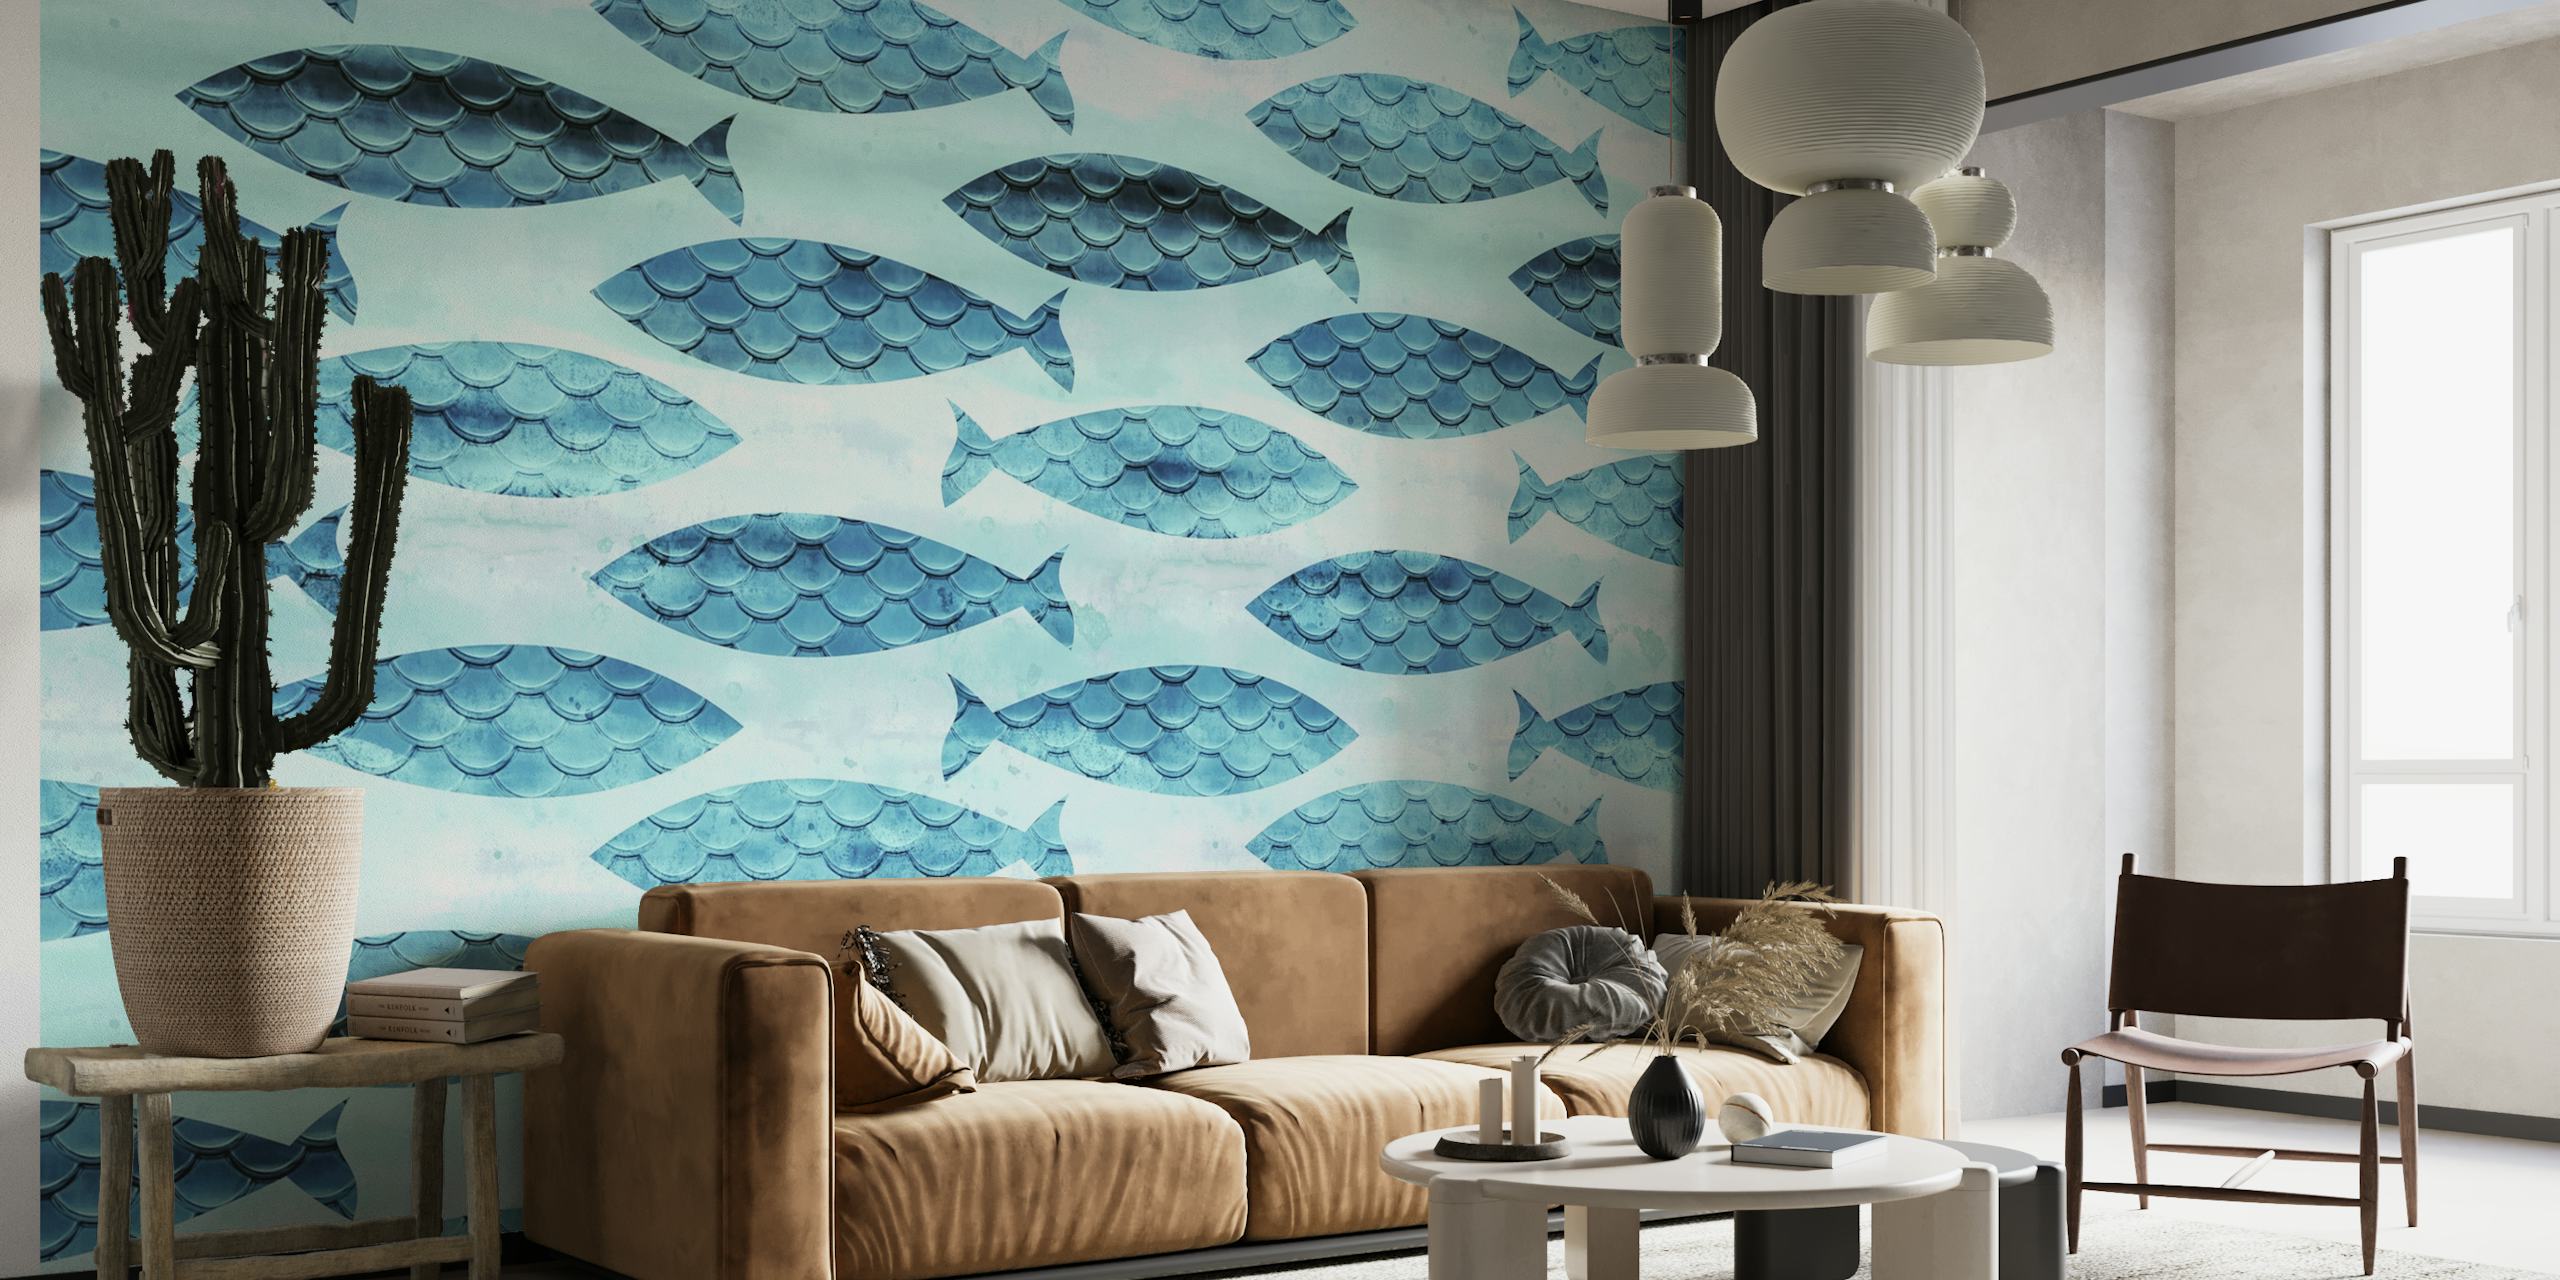 Turquoise and white fish pattern wall mural for interior decoration